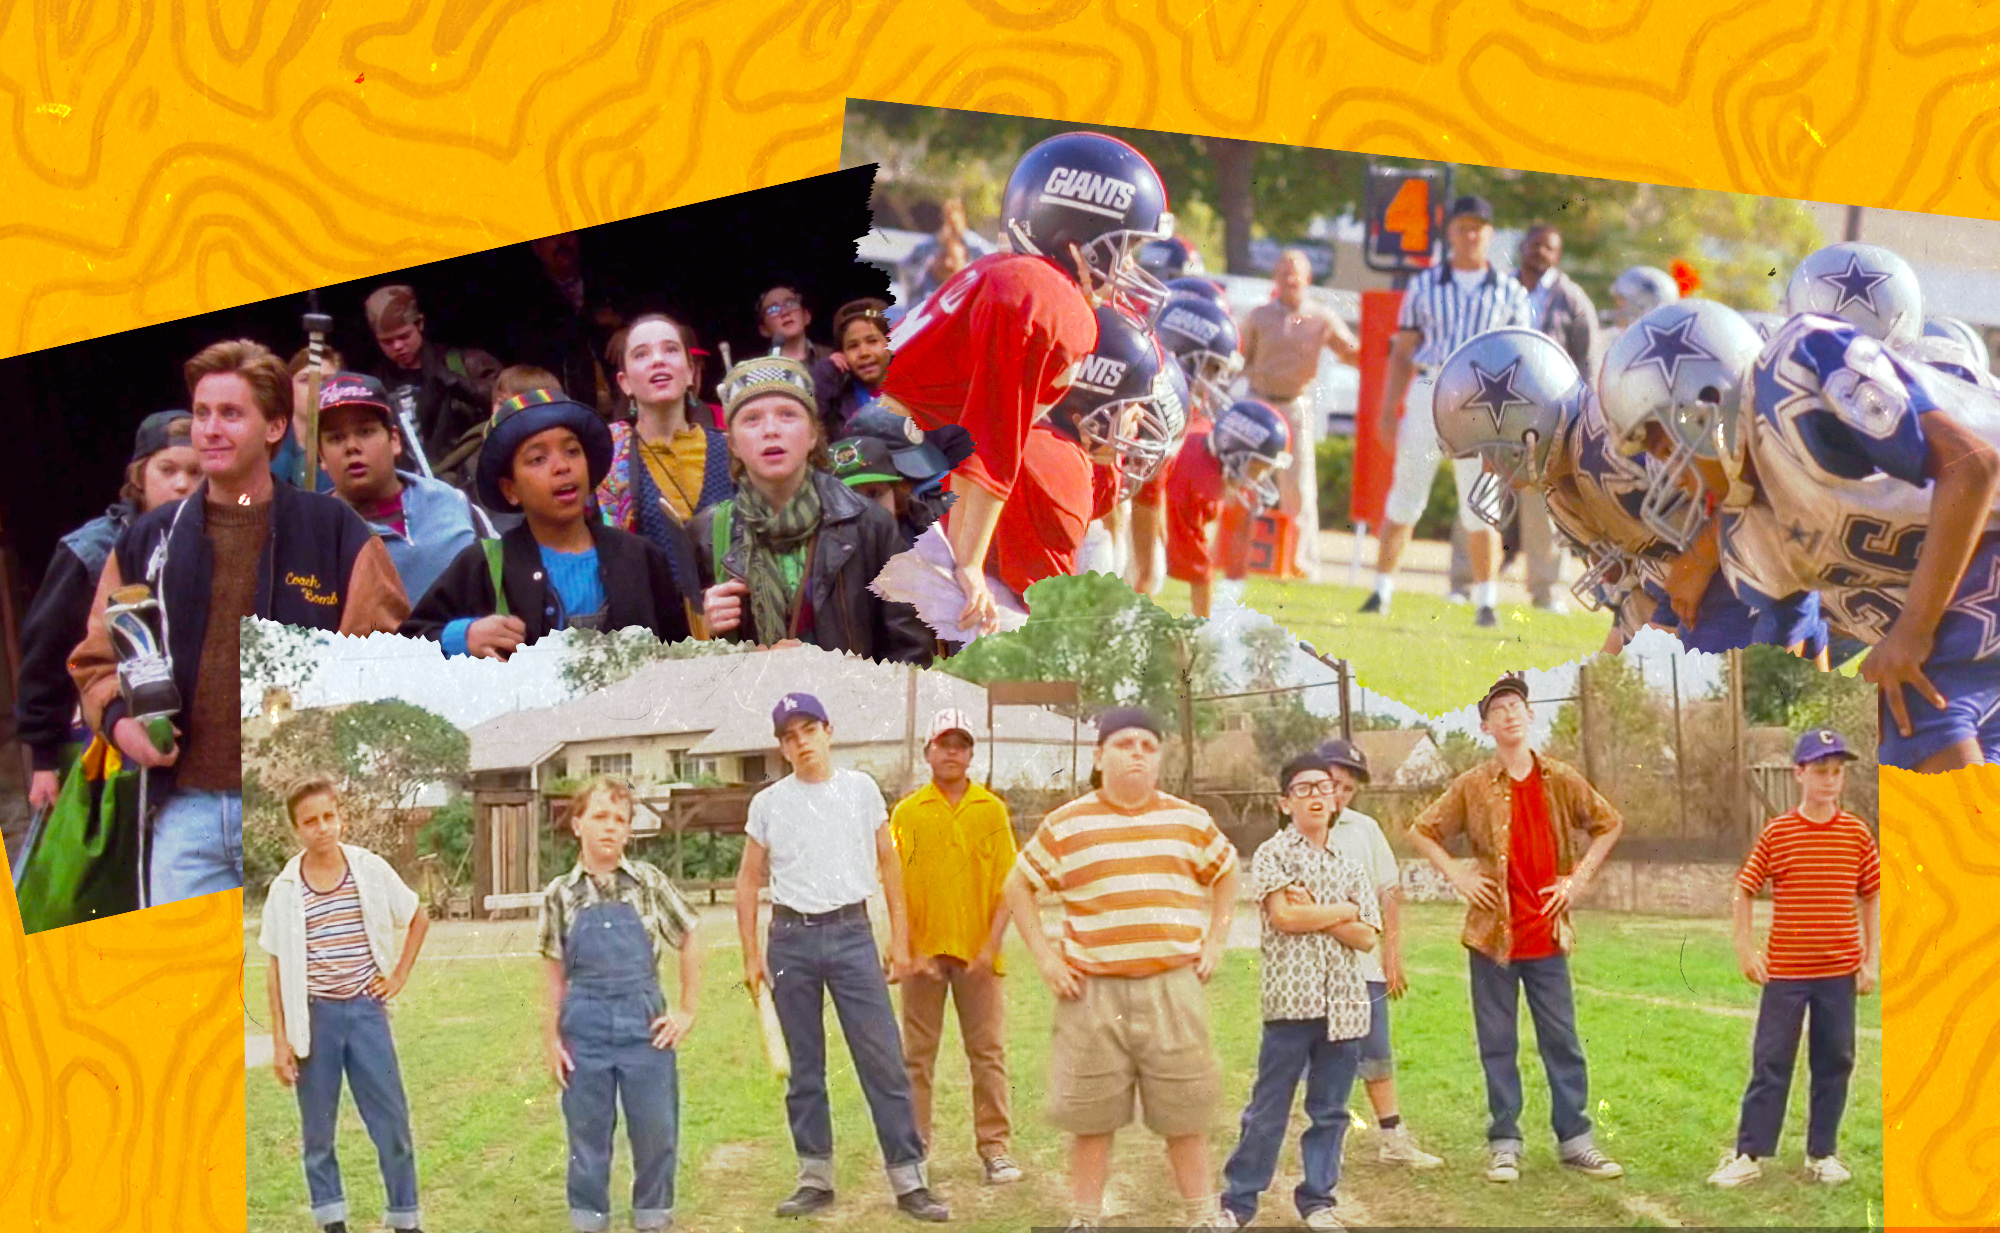 A collage featuring scenes from the 90s movies The Mighty Ducks, Little Giants, and The Sandlot